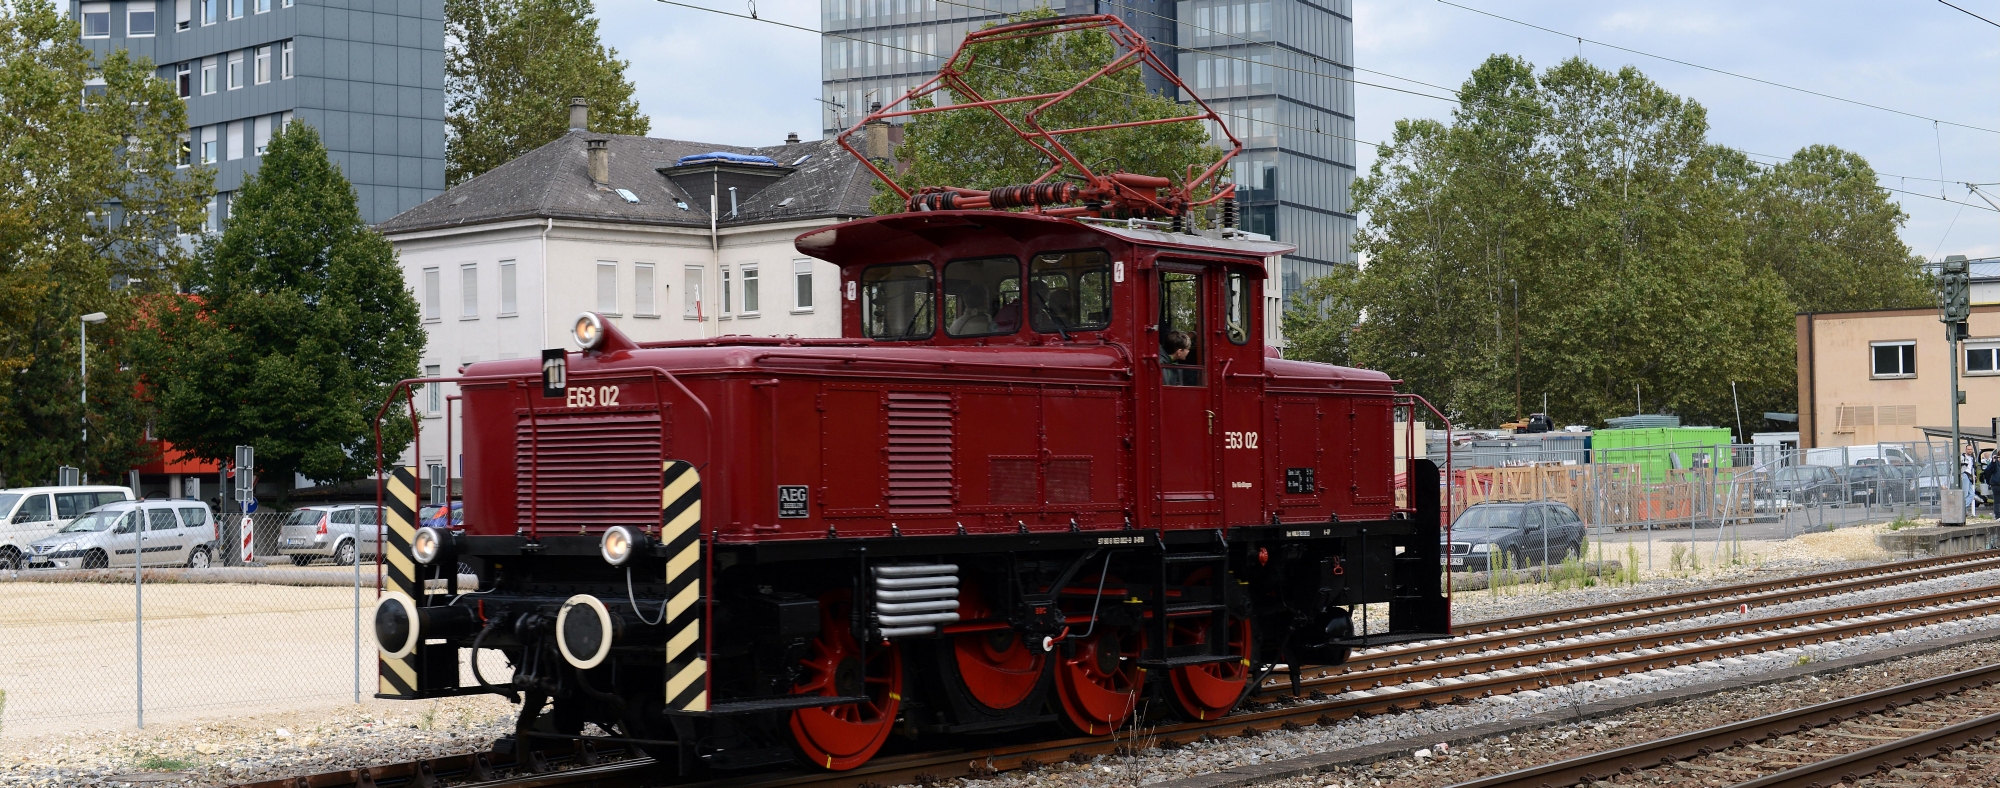 The E 63 02, which is operational again today, in September 2013 in Göppingen